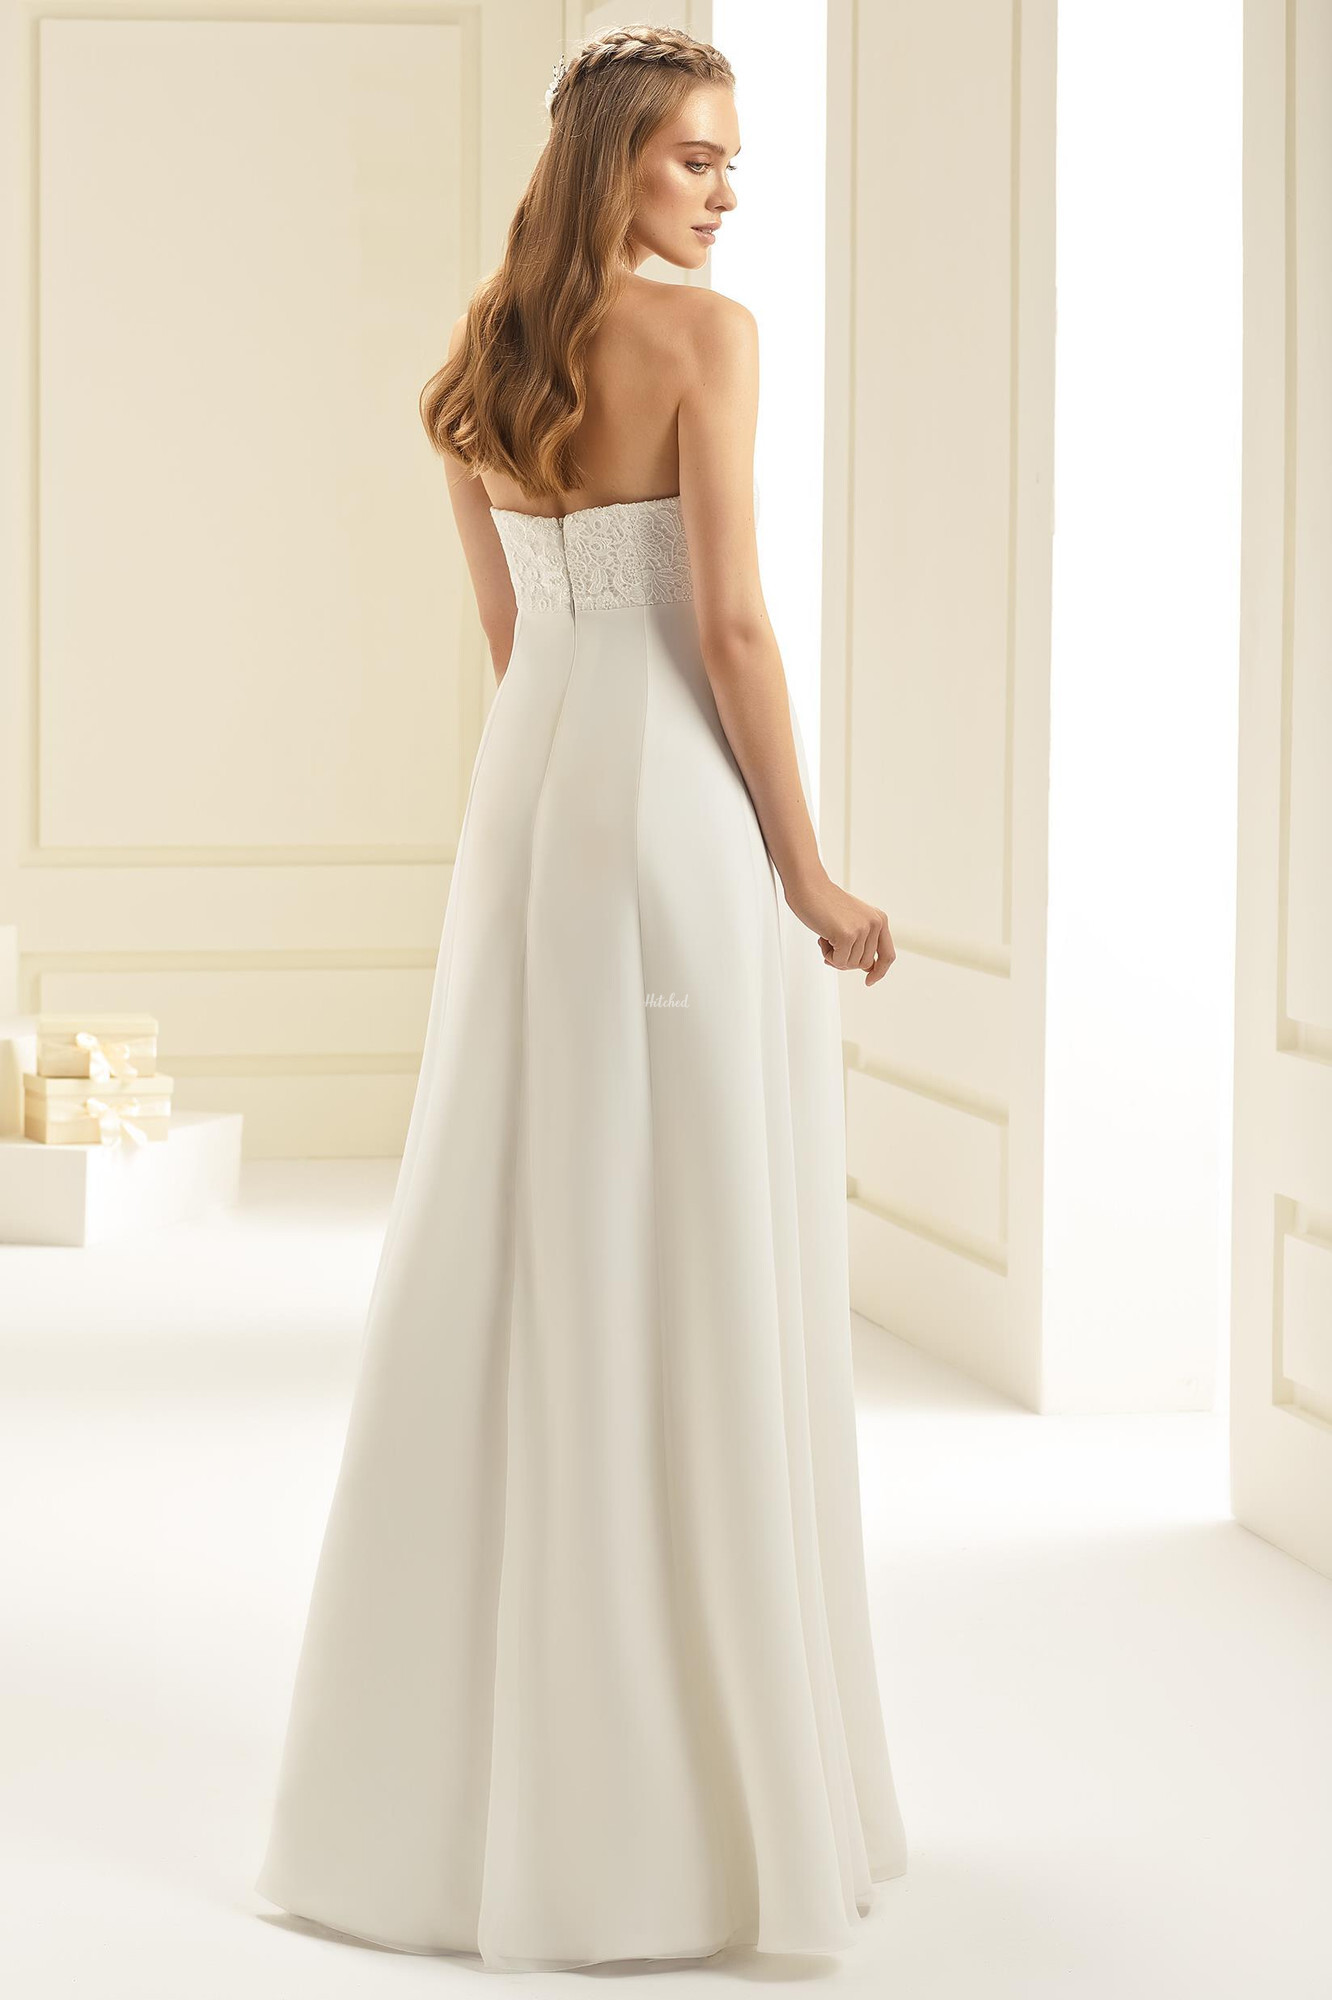 Grecian Wedding Dresses & Bridal Gowns - Page 2 | hitched.co.uk